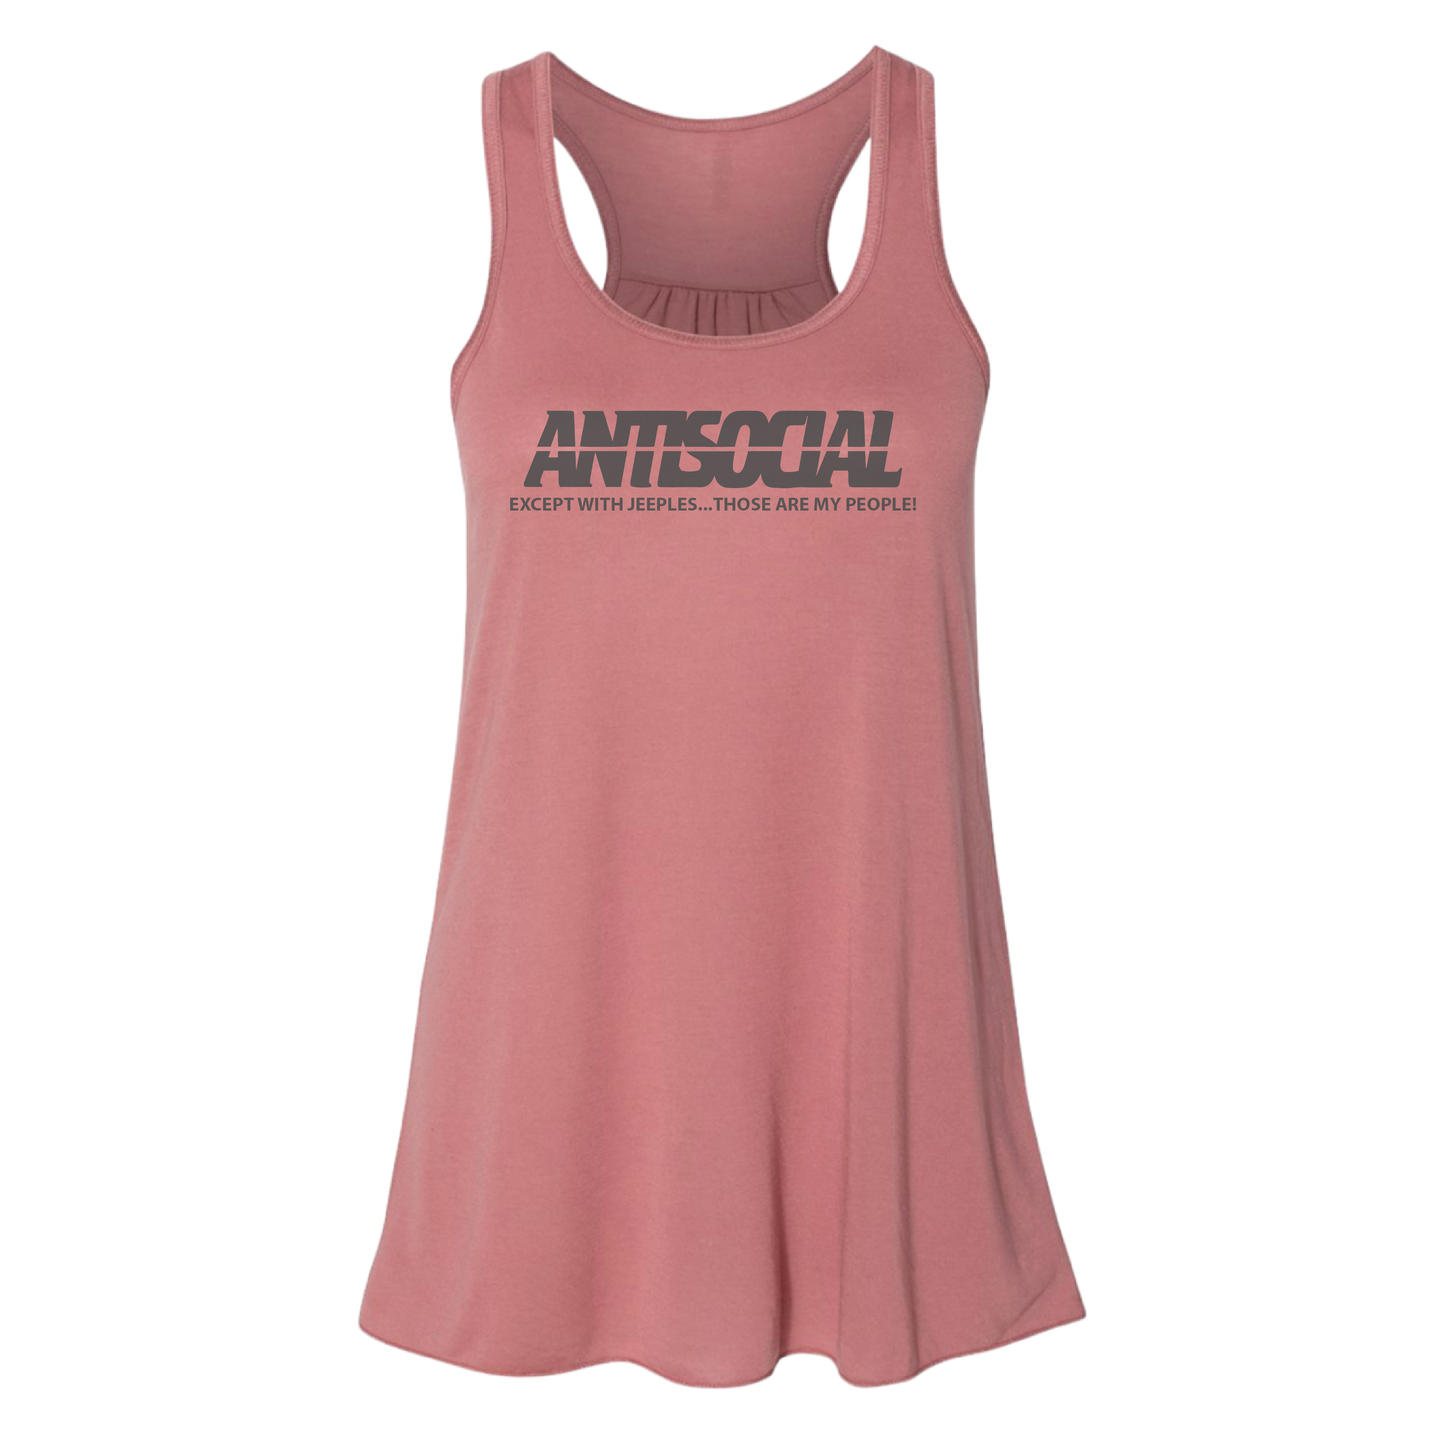 Antisocial- Available in Multiple Colors & Styles